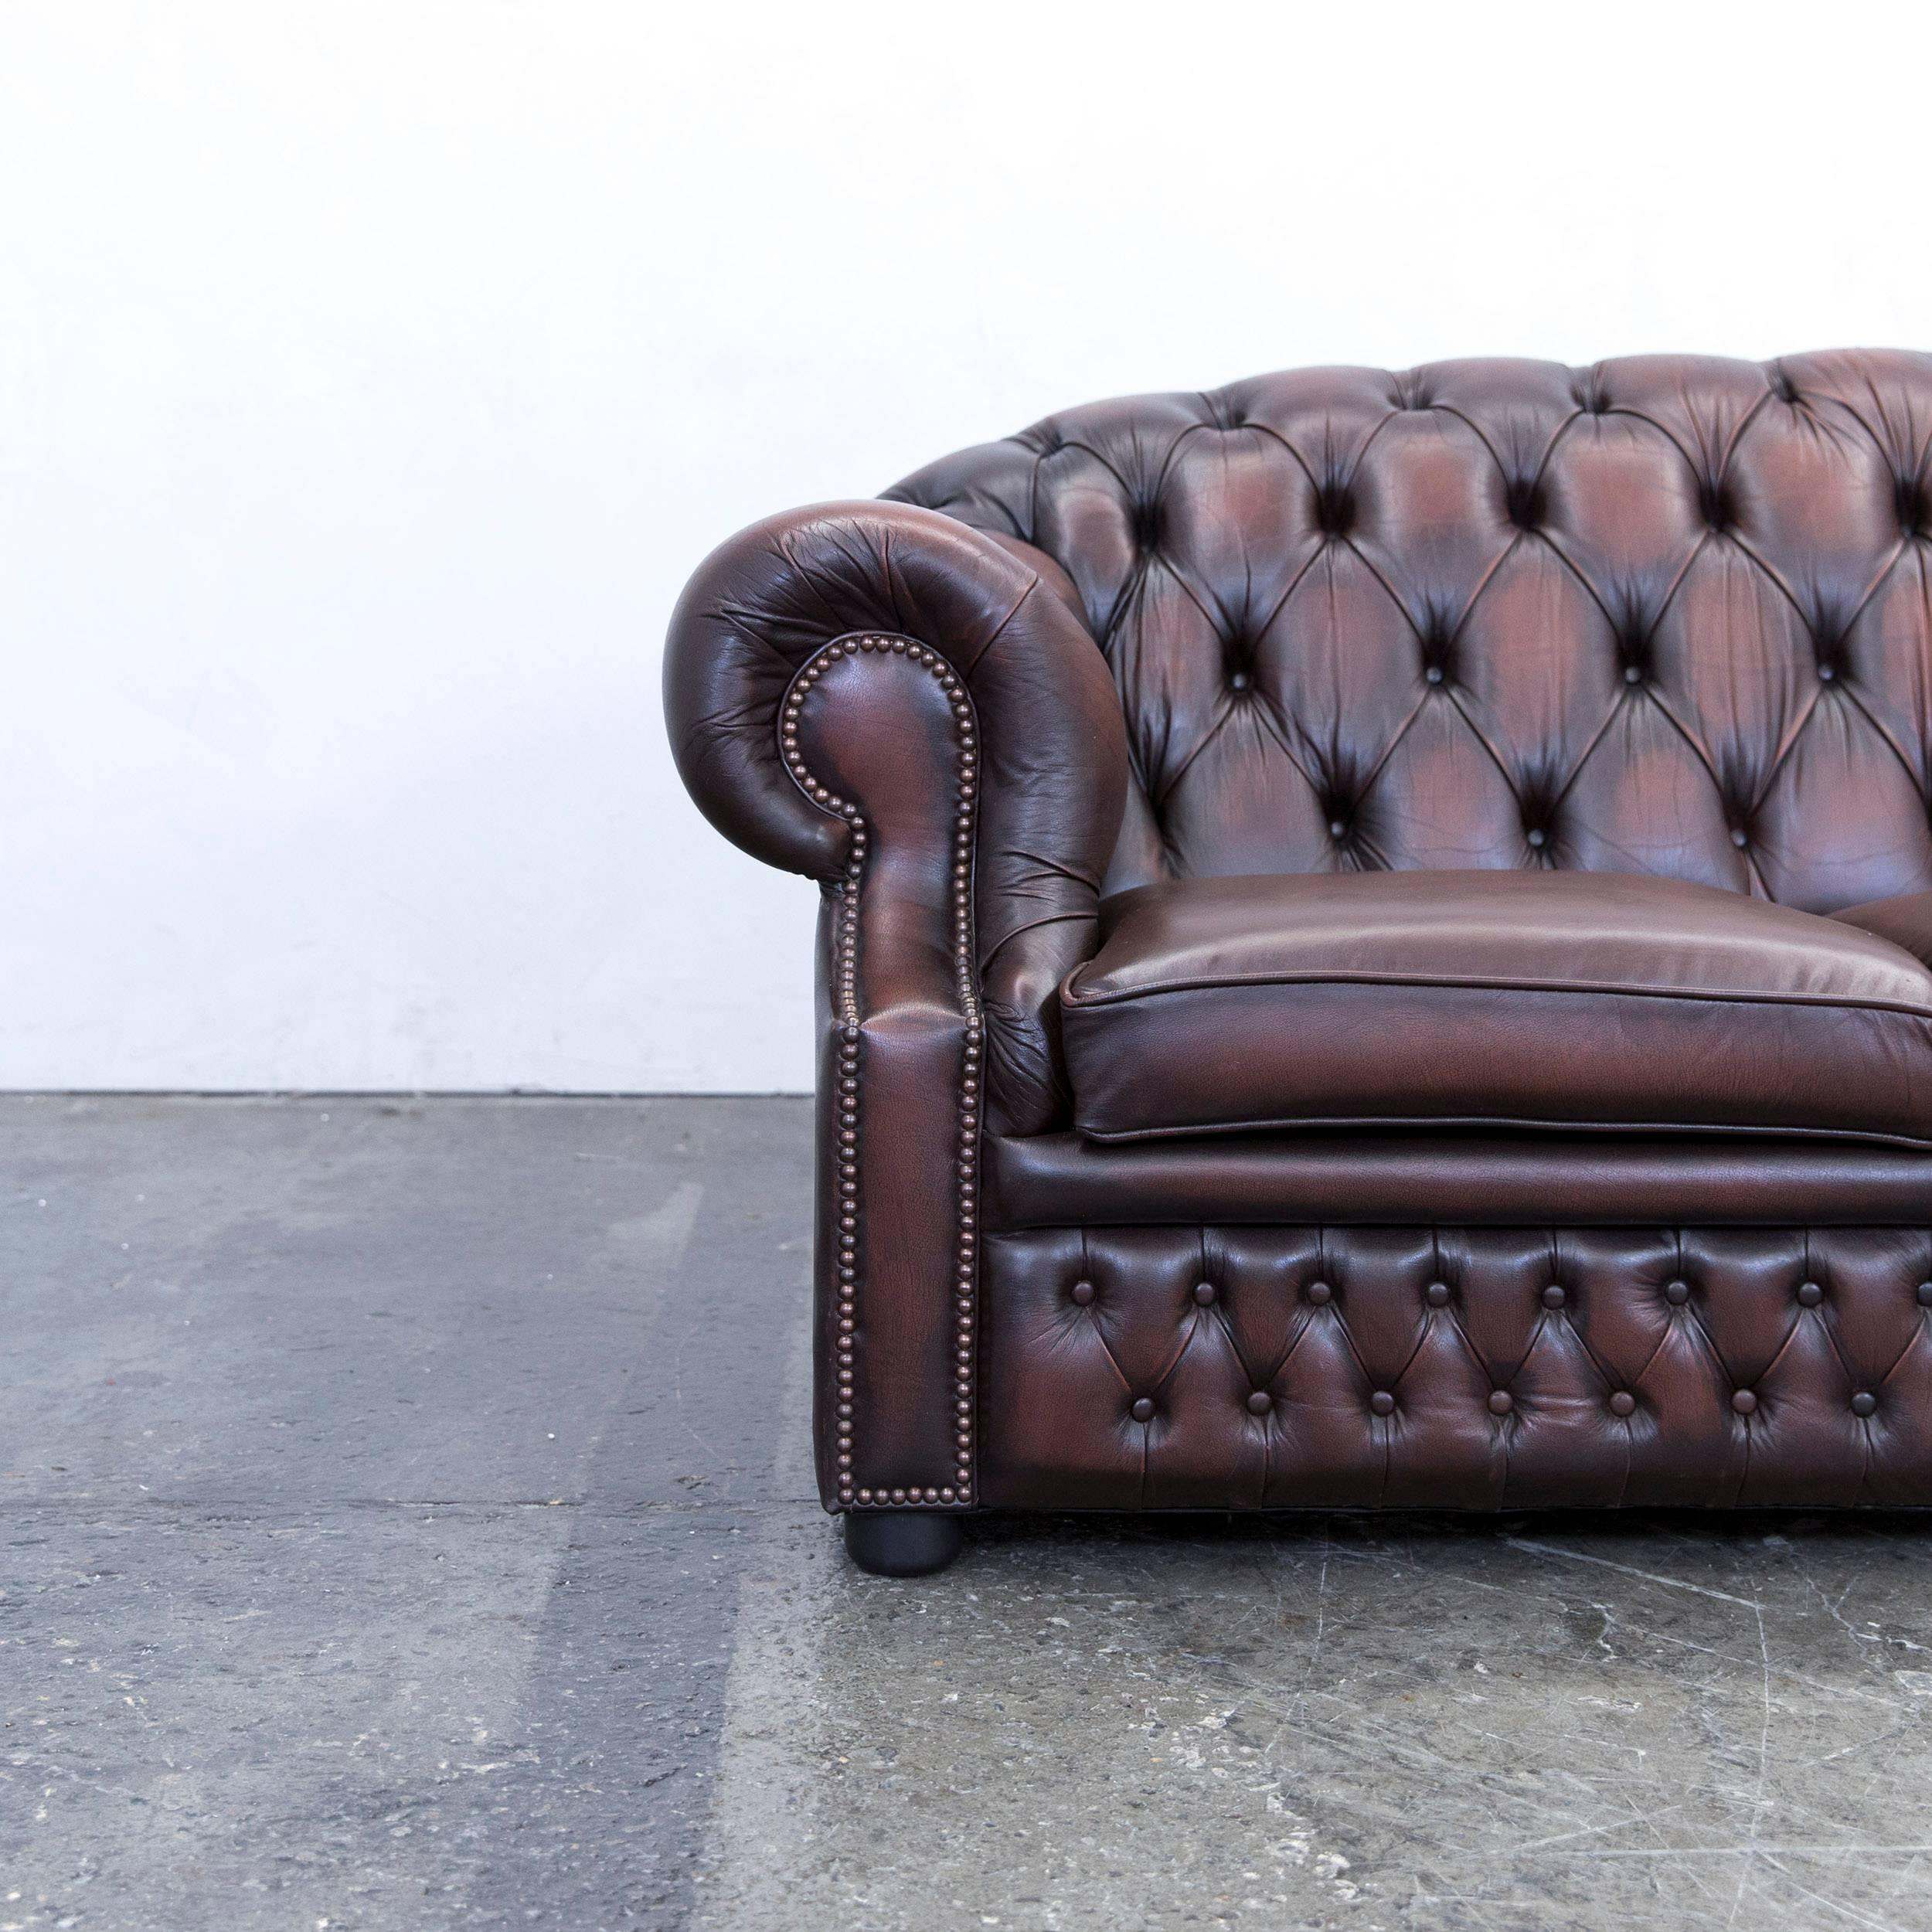 Brown colored original Centurion Chesterfield leather sofa in a vintage design, made for pure comfort and elegance.